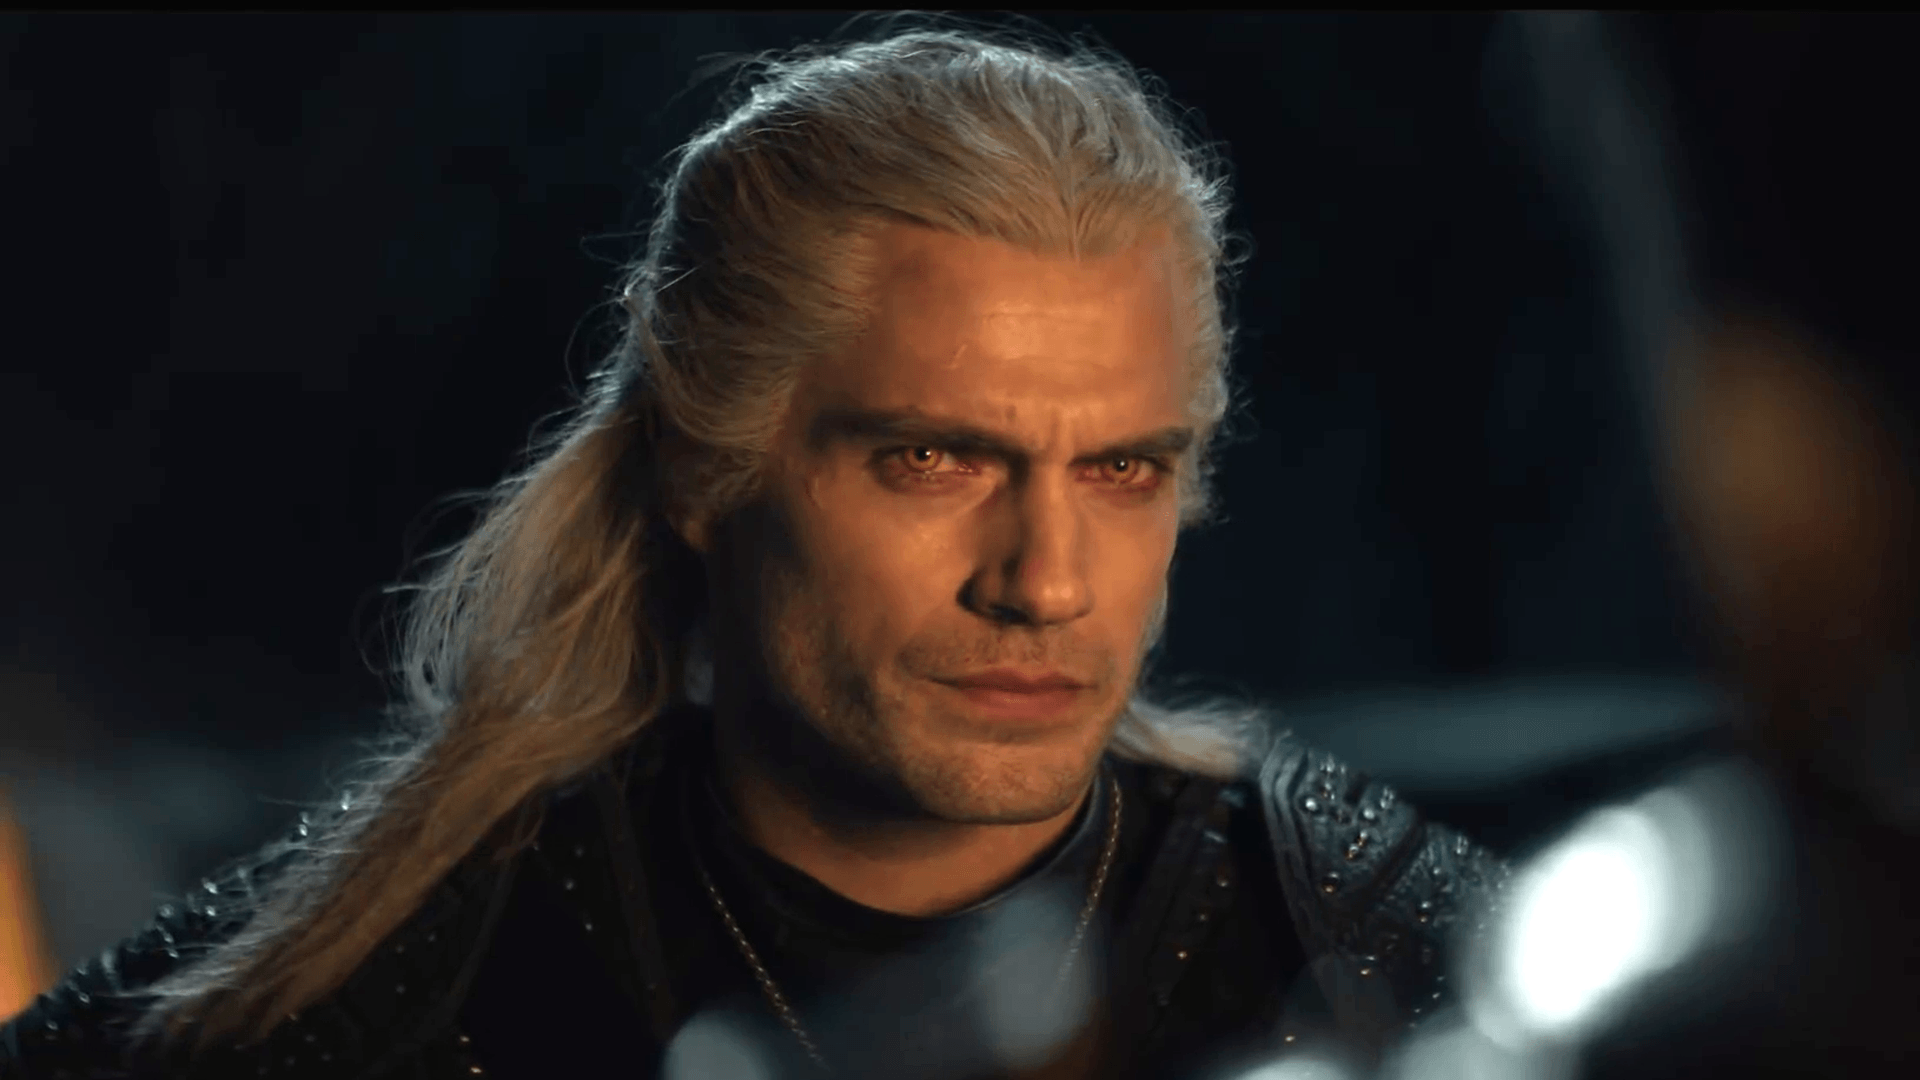 The Witcher actor Henry Cavill is a big gamer who held